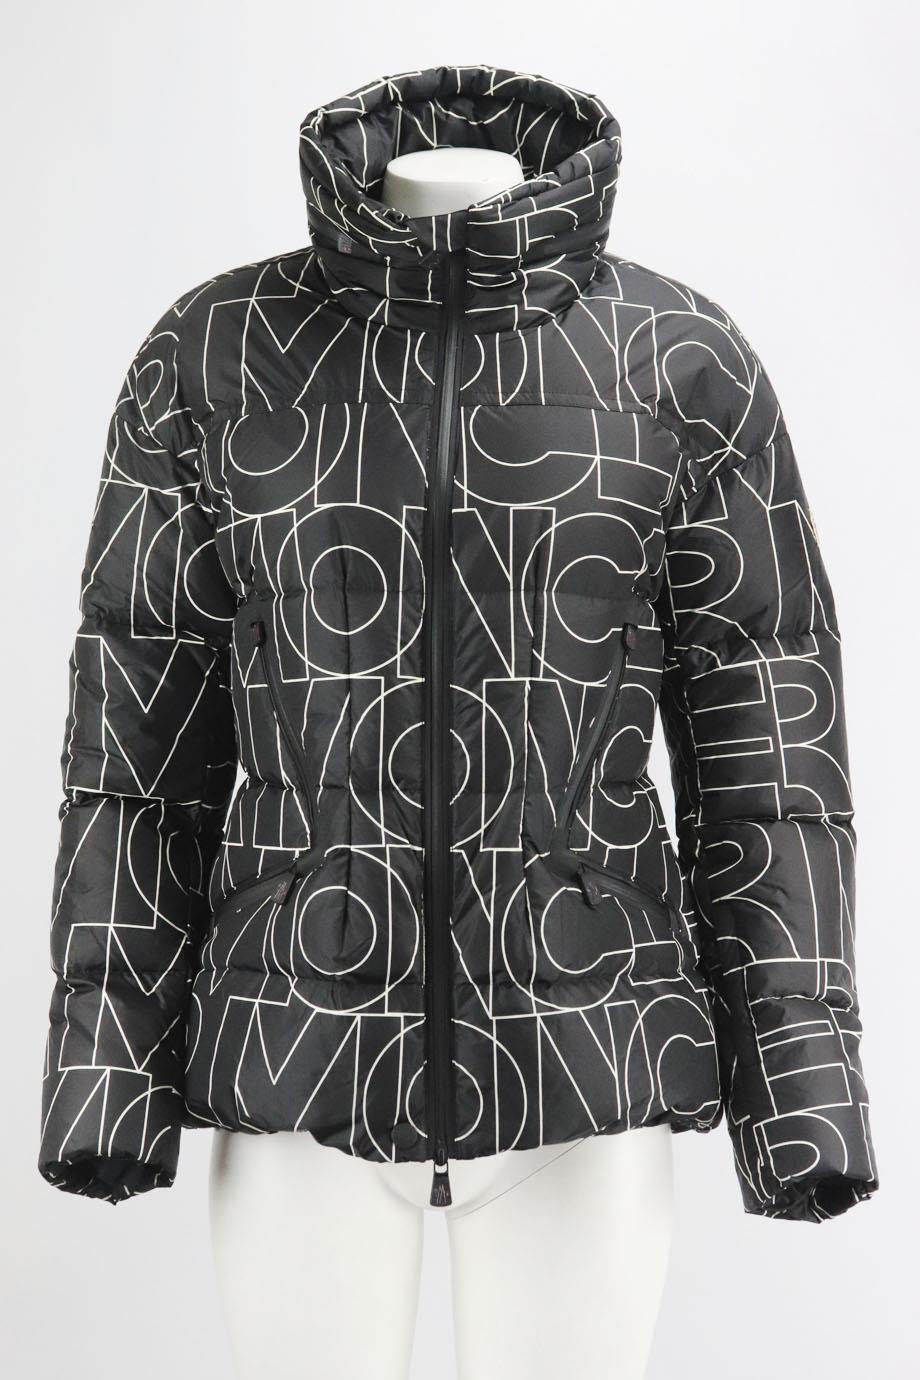 Moncler Grenoble Dixence printed quilted down ski jacket. Black and white. Long sleeve, turtleneck. Zip fastening at front. 100% Polyamide; lining: 100% polyester. Size: 4 (UK 14, US 10, FR 42, IT 46). Shoulder to shoulder: 21 in. Bust: 40 in.